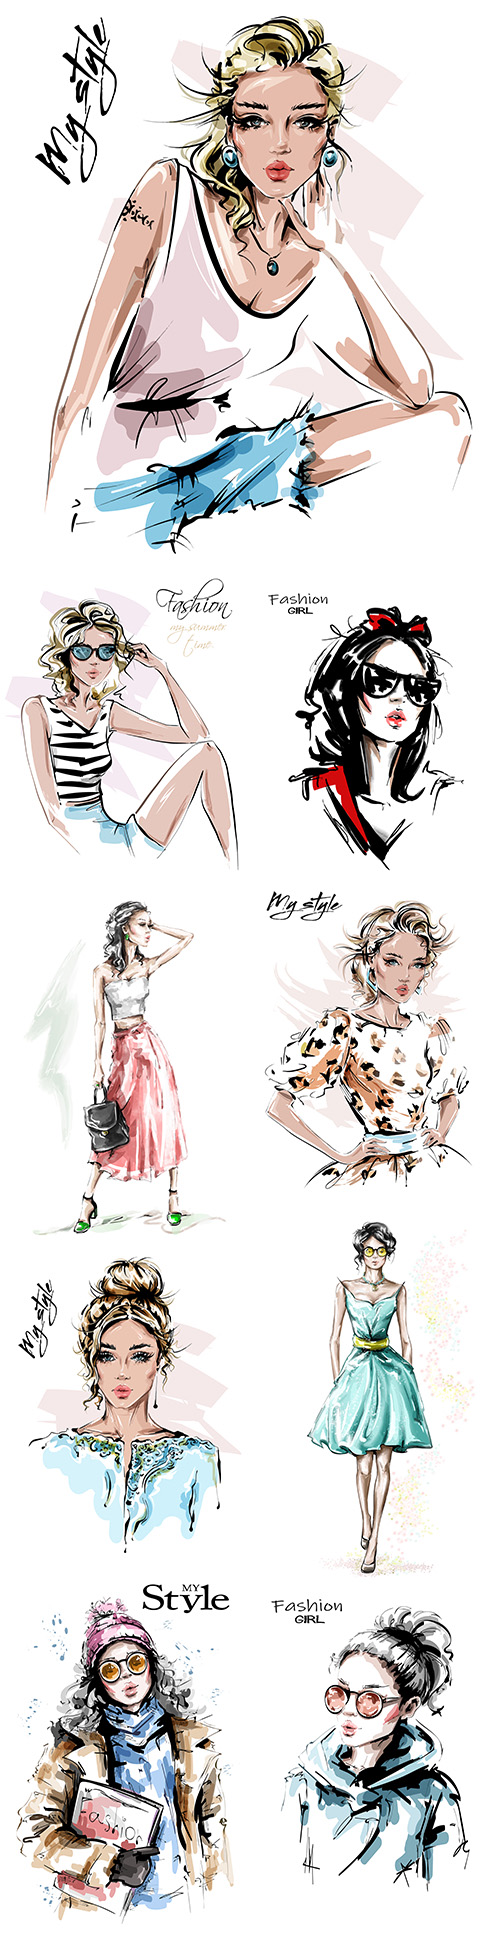 My style Hand drawn beautiful young and fashion girl 6
